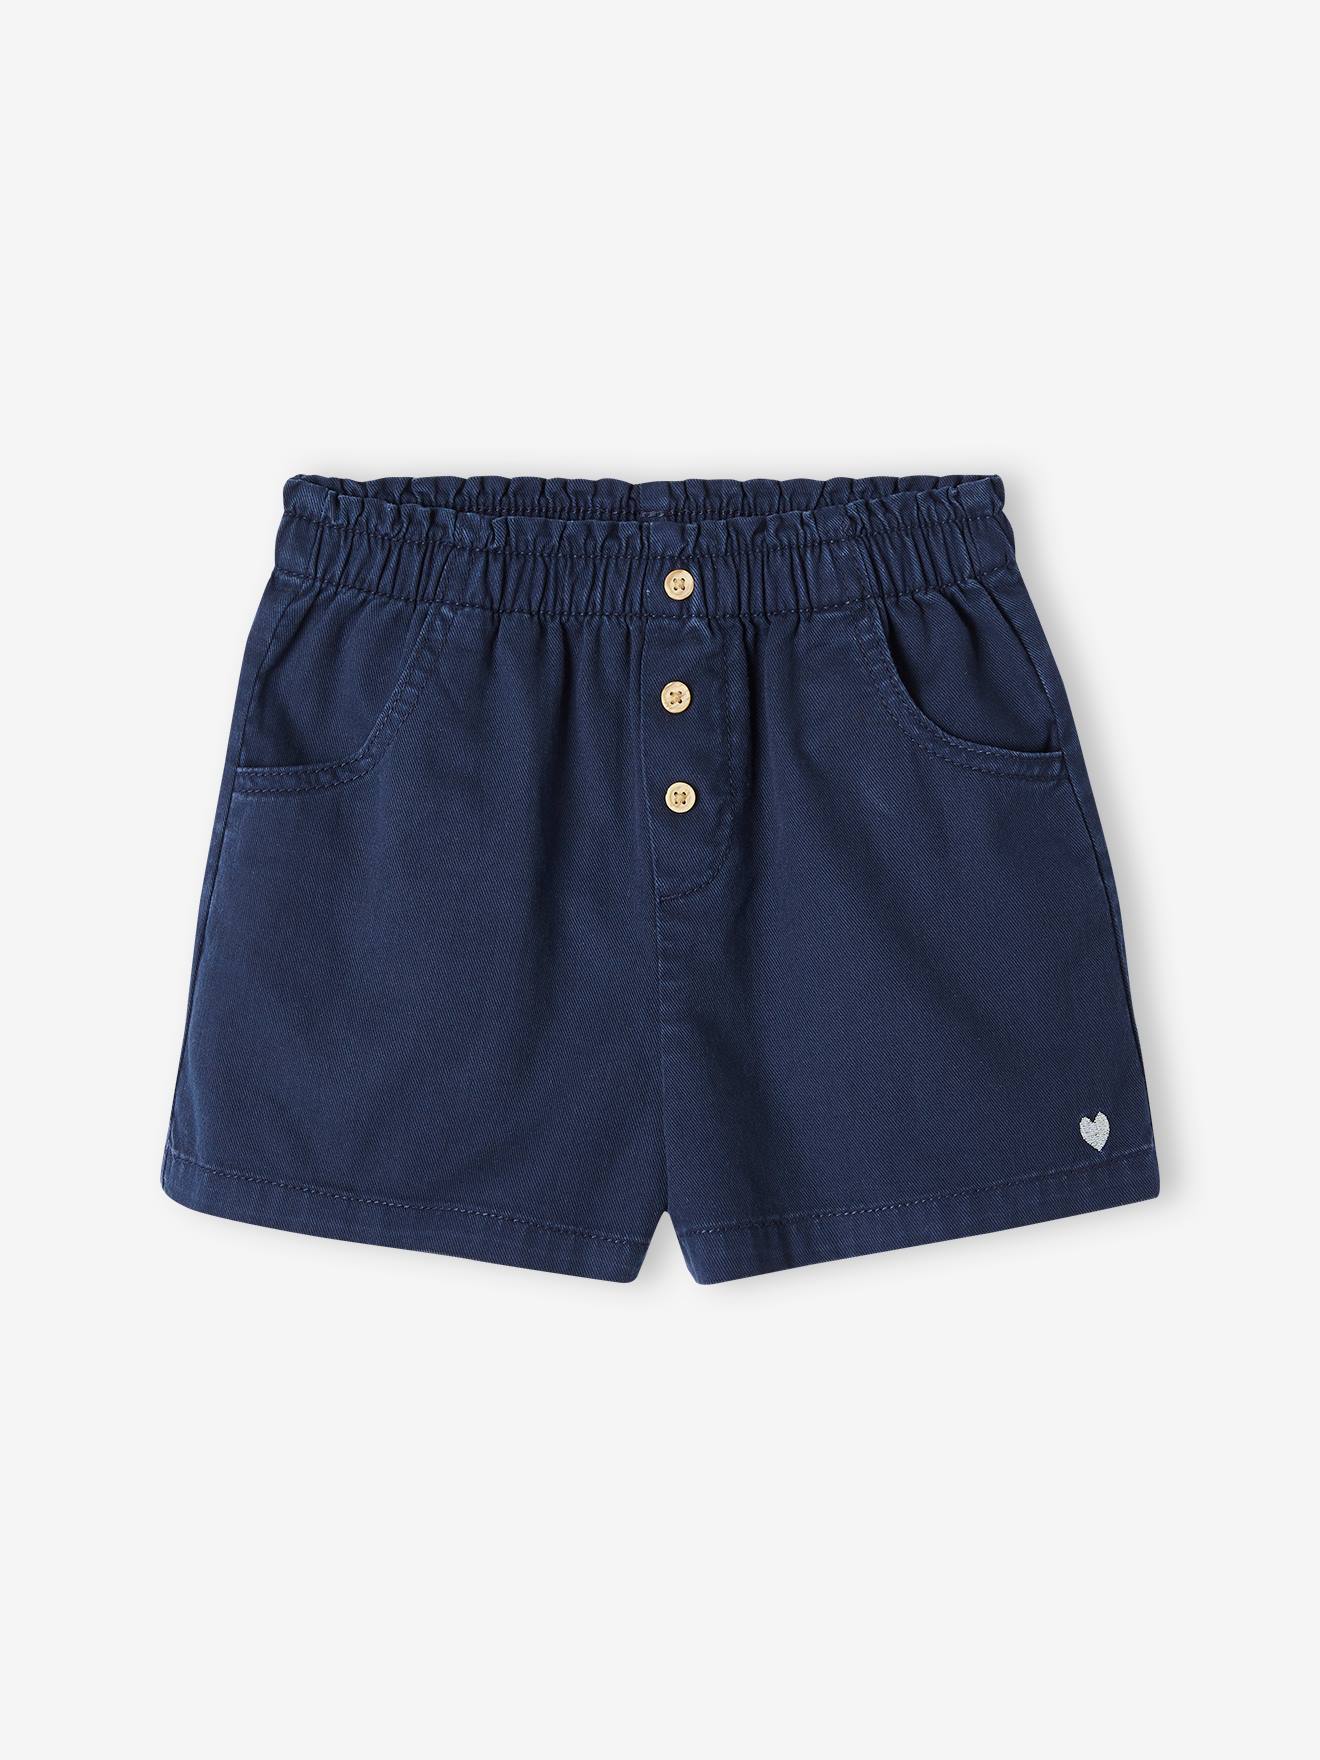 Colourful Shorts, Easy to Put On, for Girls navy blue